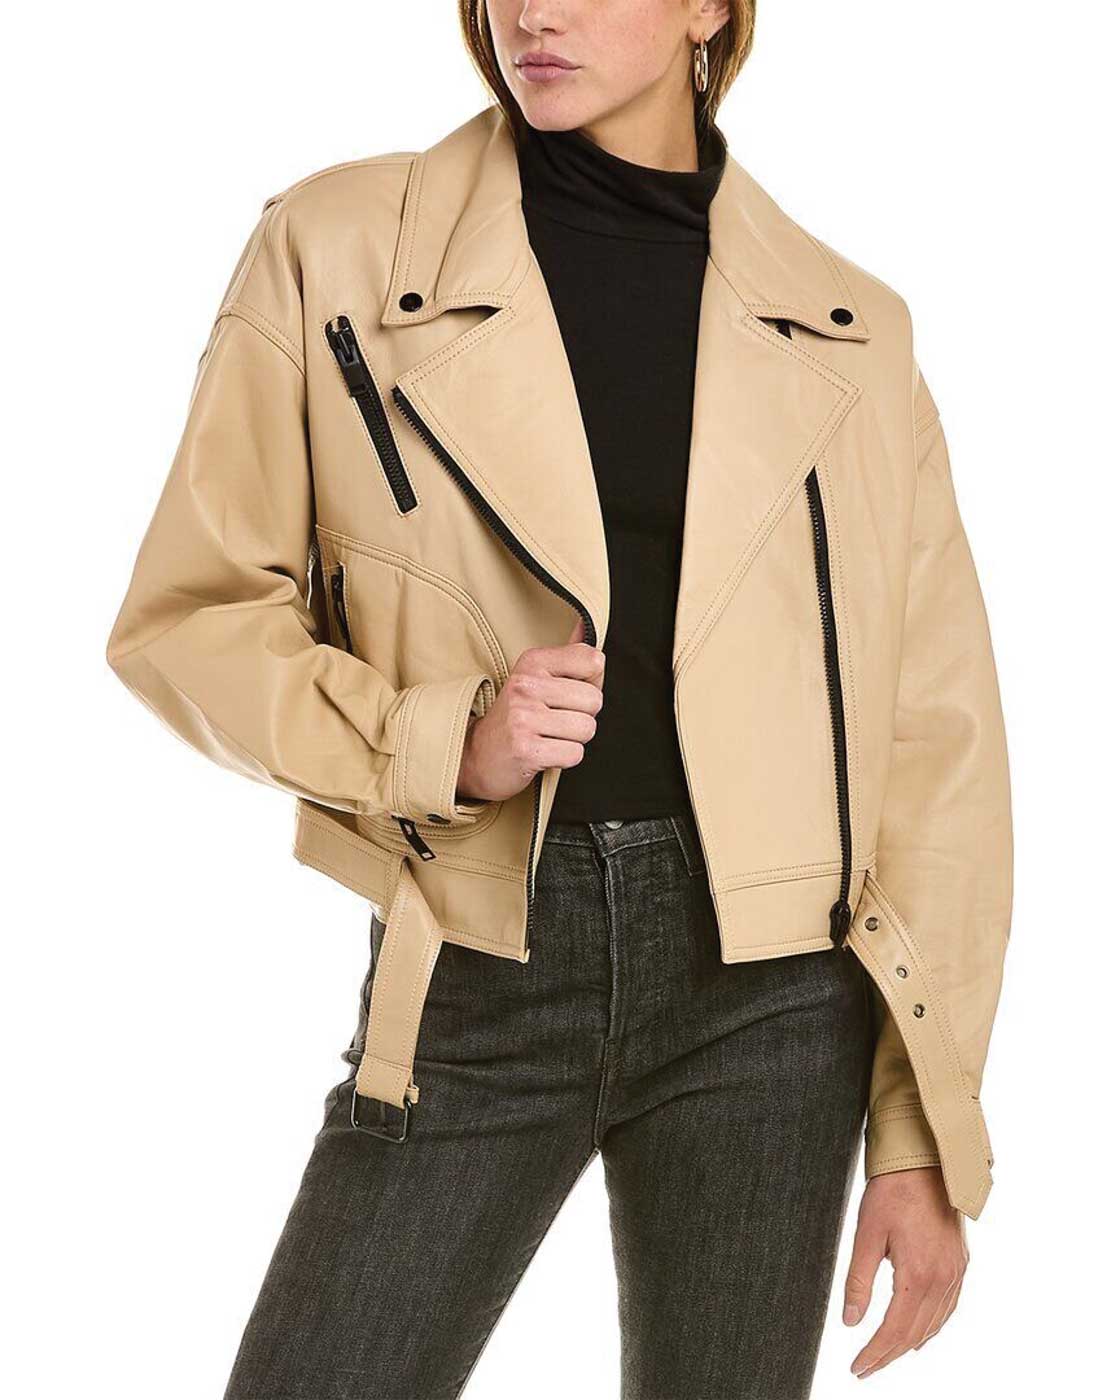 36 Ena Pelly Grace Biker Jacket Regular Price $748 Available At Marcus